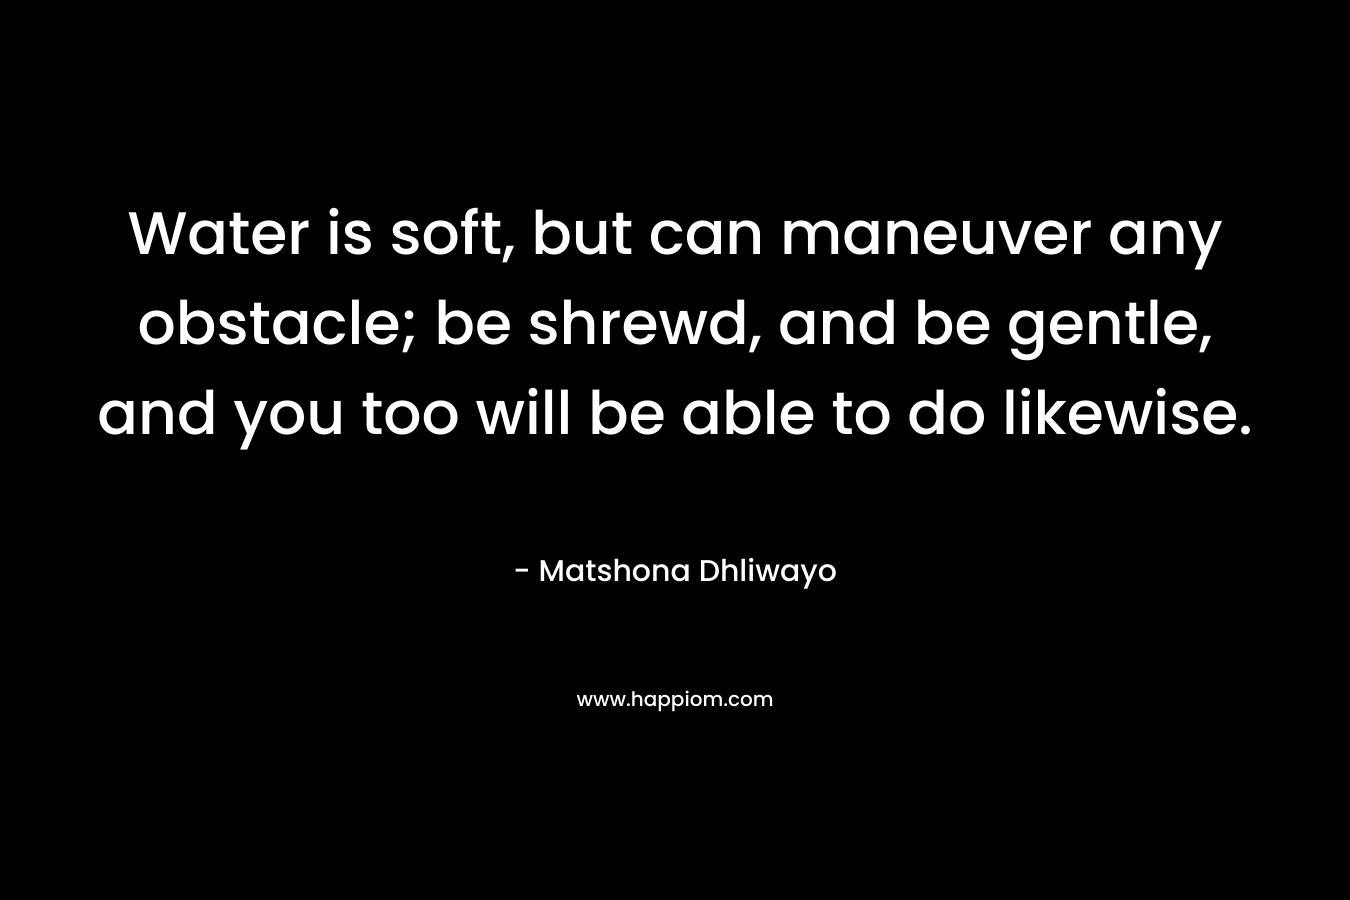 Water is soft, but can maneuver any obstacle; be shrewd, and be gentle, and you too will be able to do likewise.